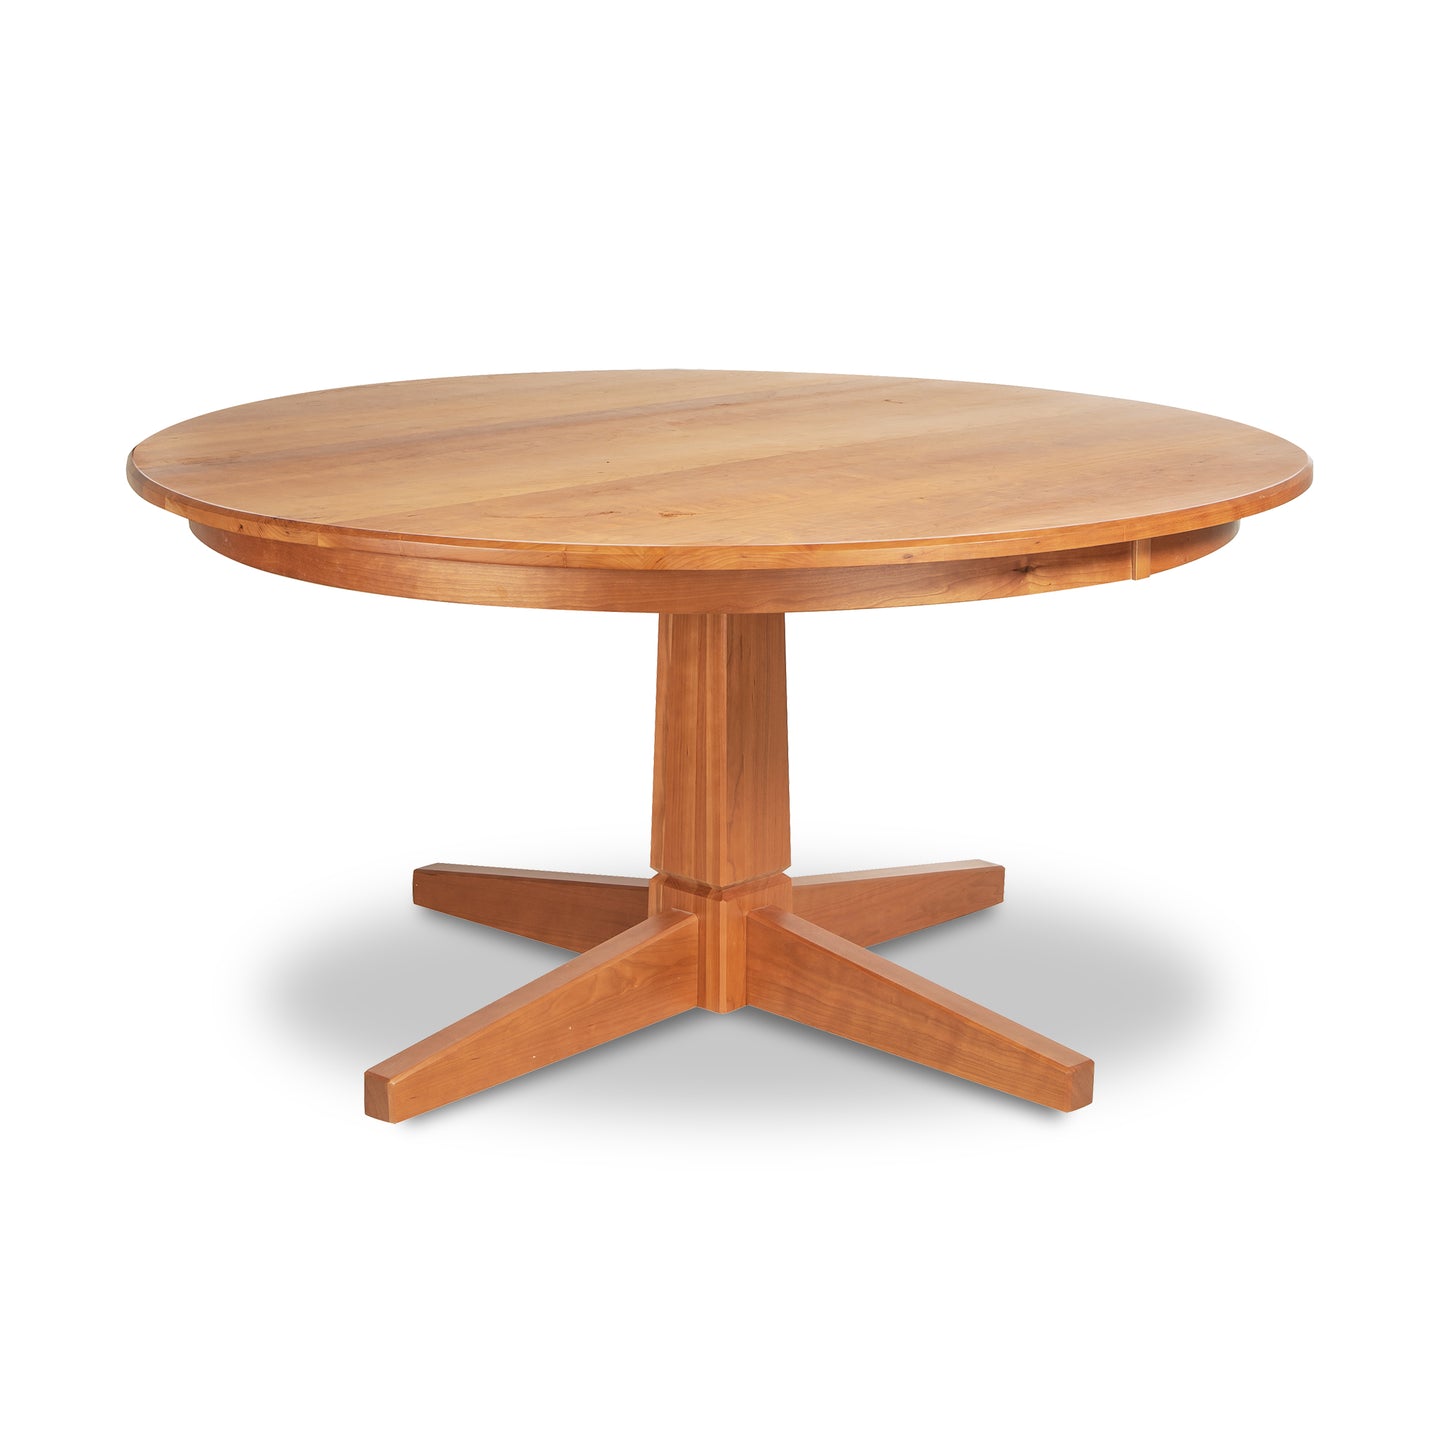 A Lyndon Furniture Natural Vermont Single Pedestal 60" Round Solid Top Table - Clearance with four legs on a white background.